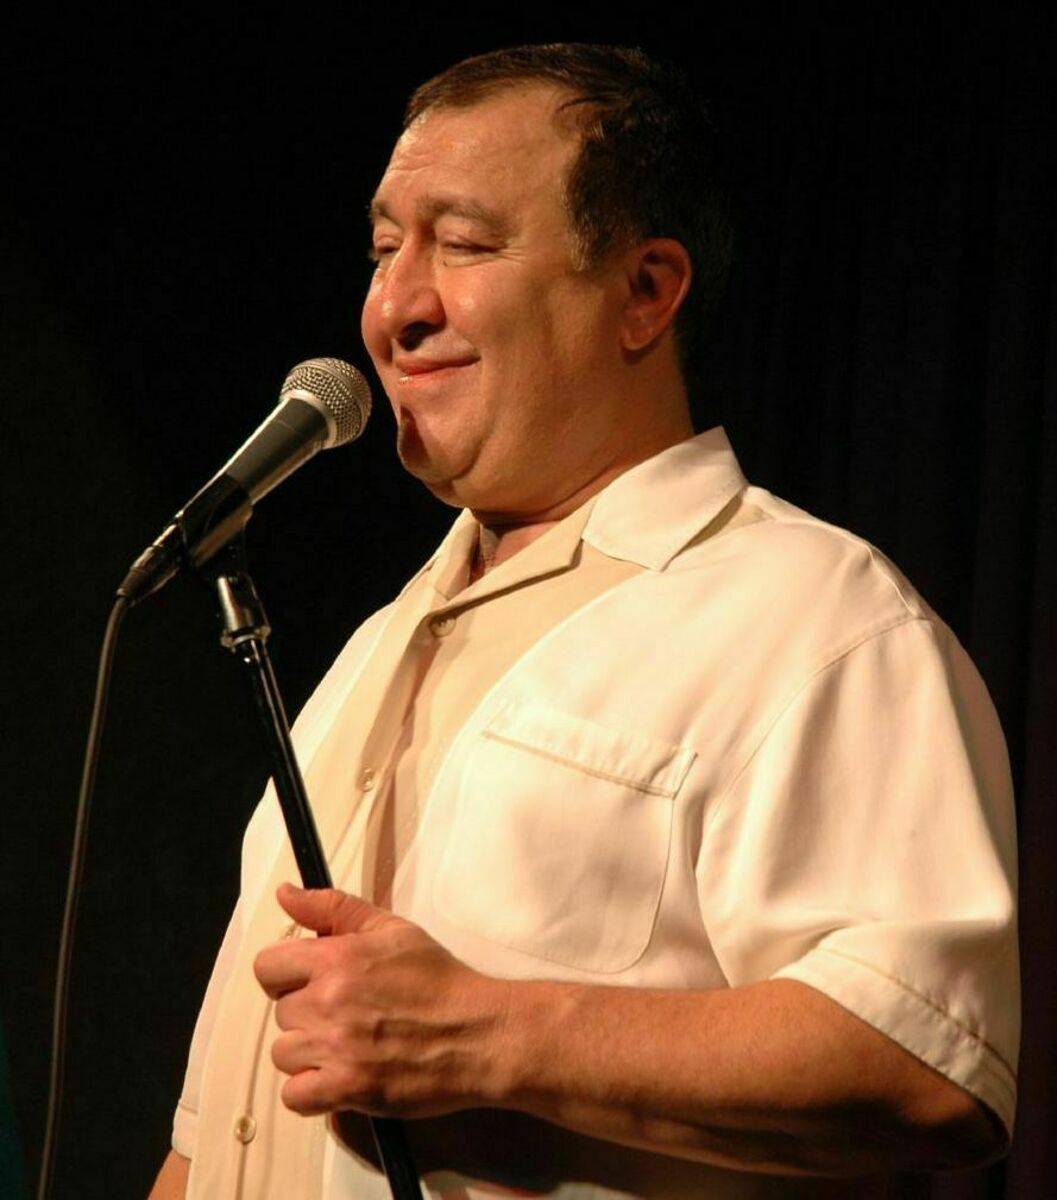 Dom Irrera - Famous Voice Actor